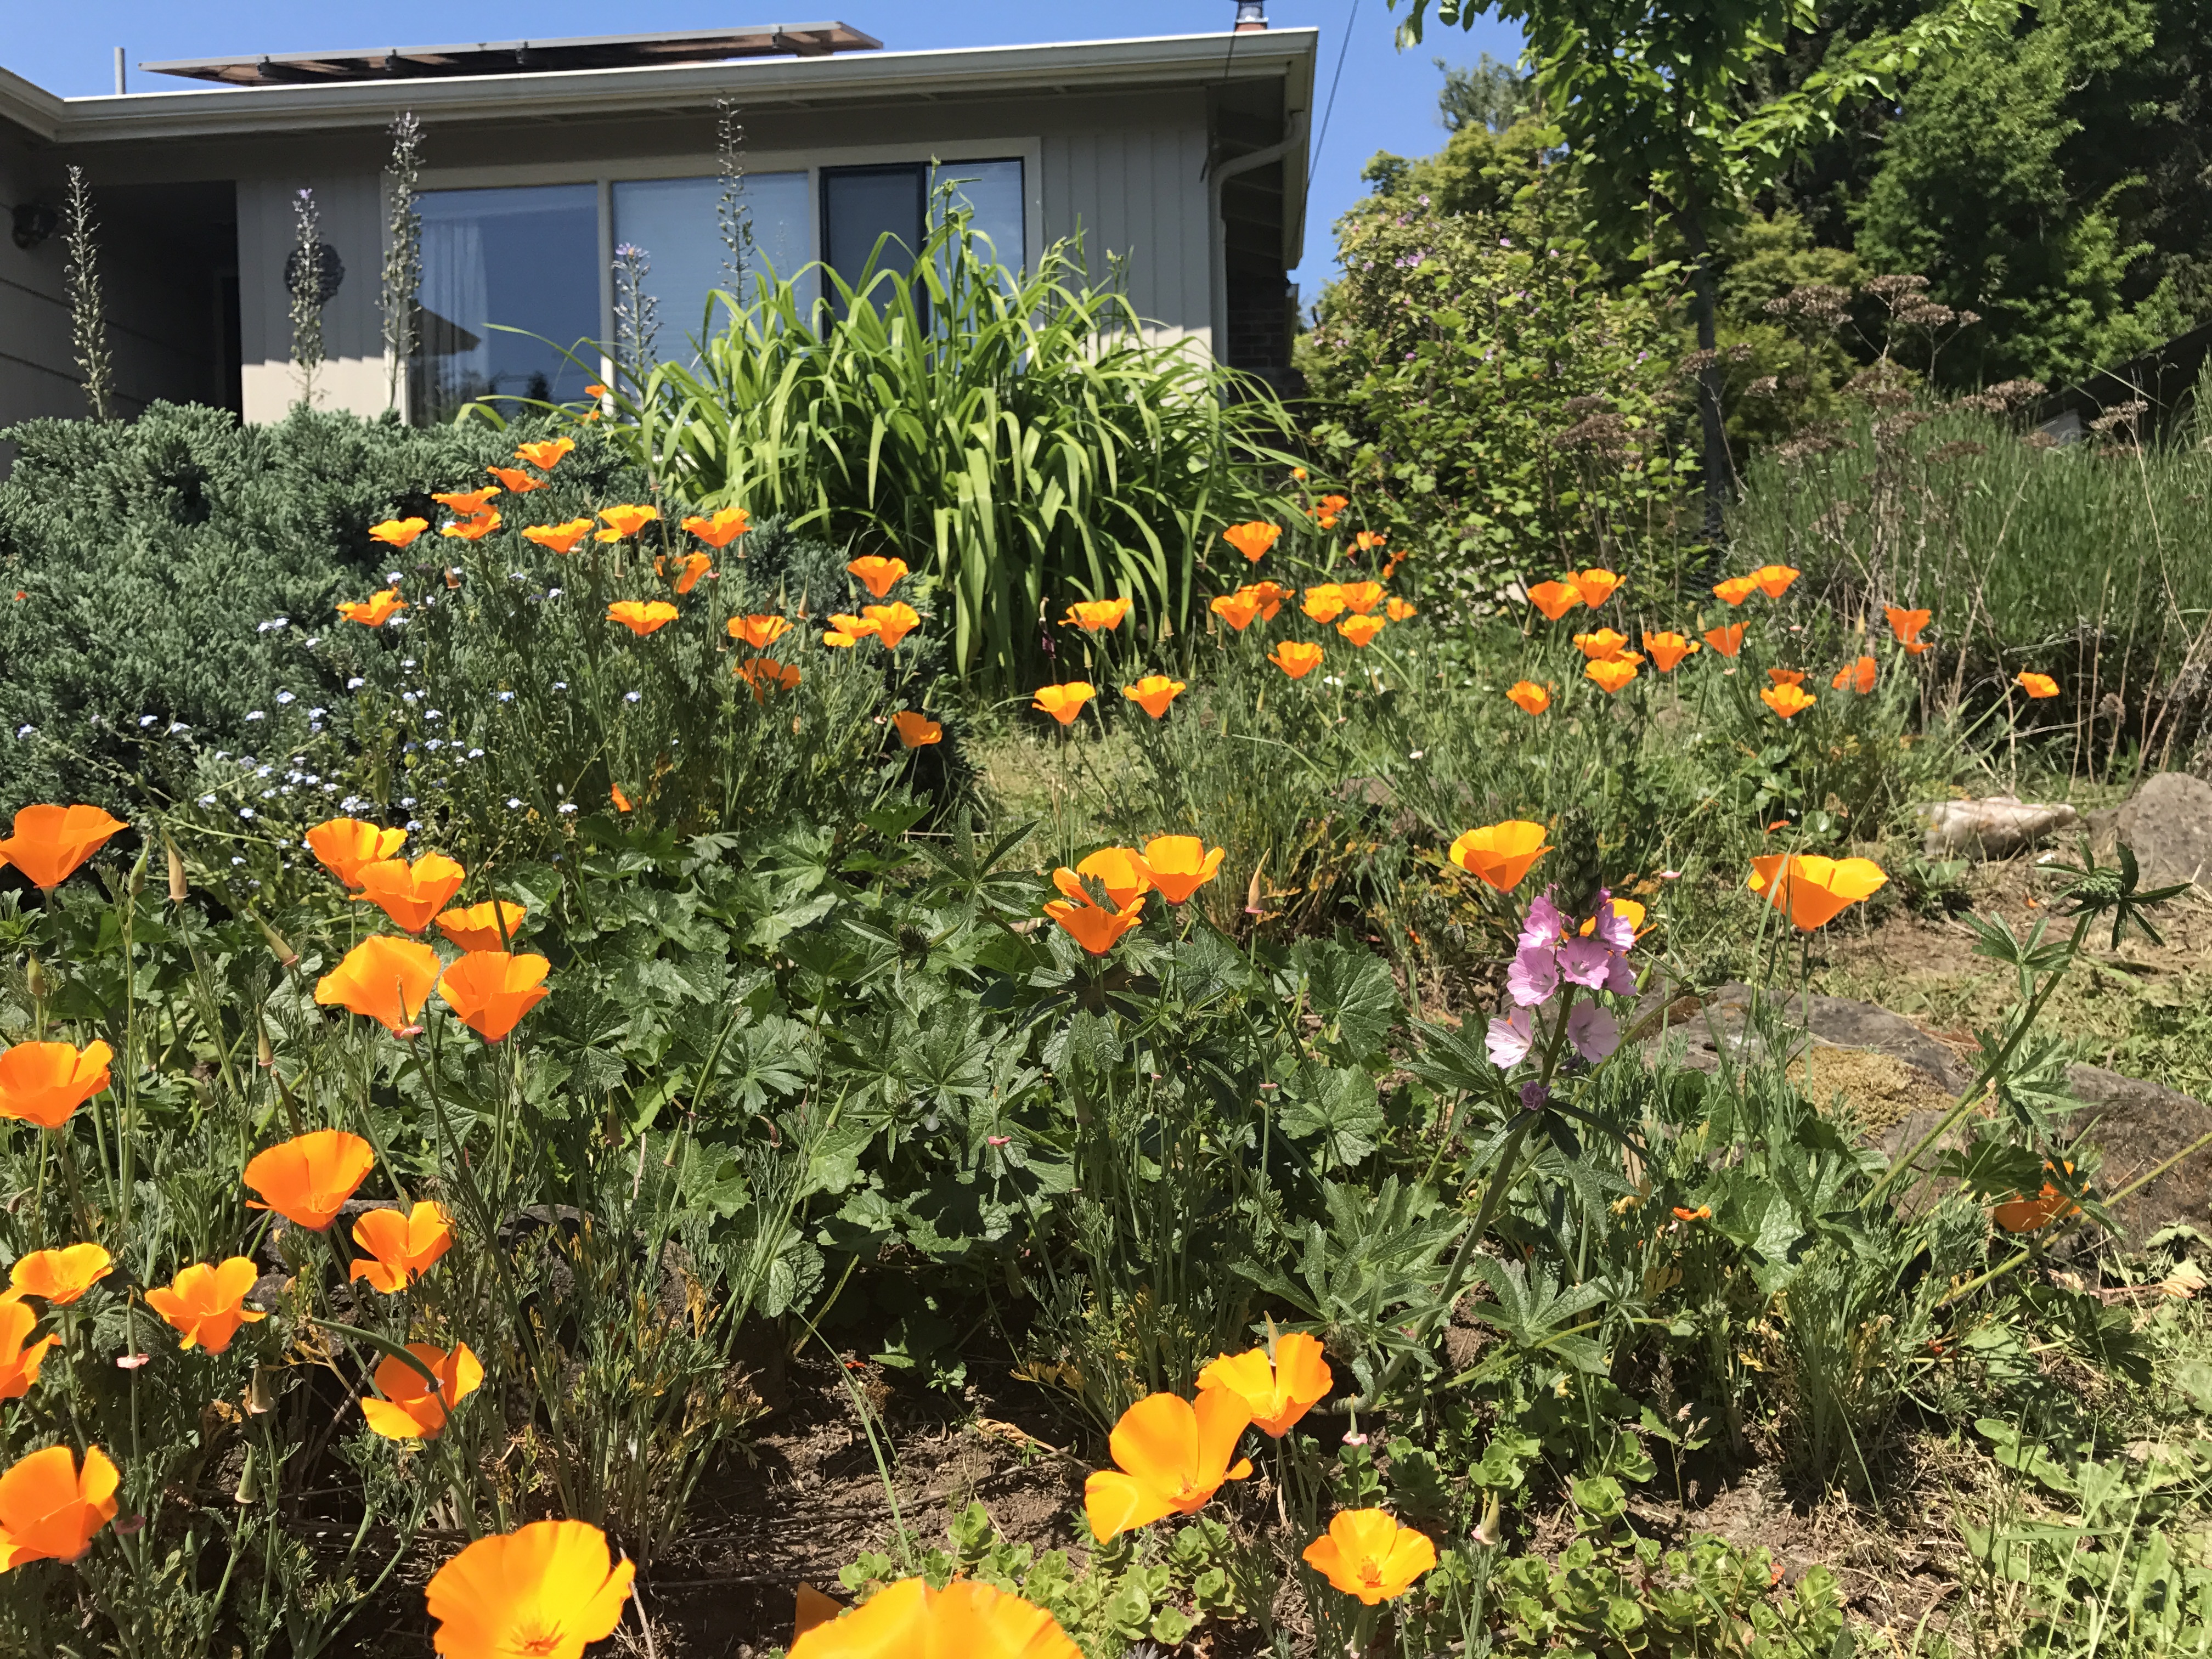 A front yard bursts with colorful blooms, most prominently, bright orange California poppies.